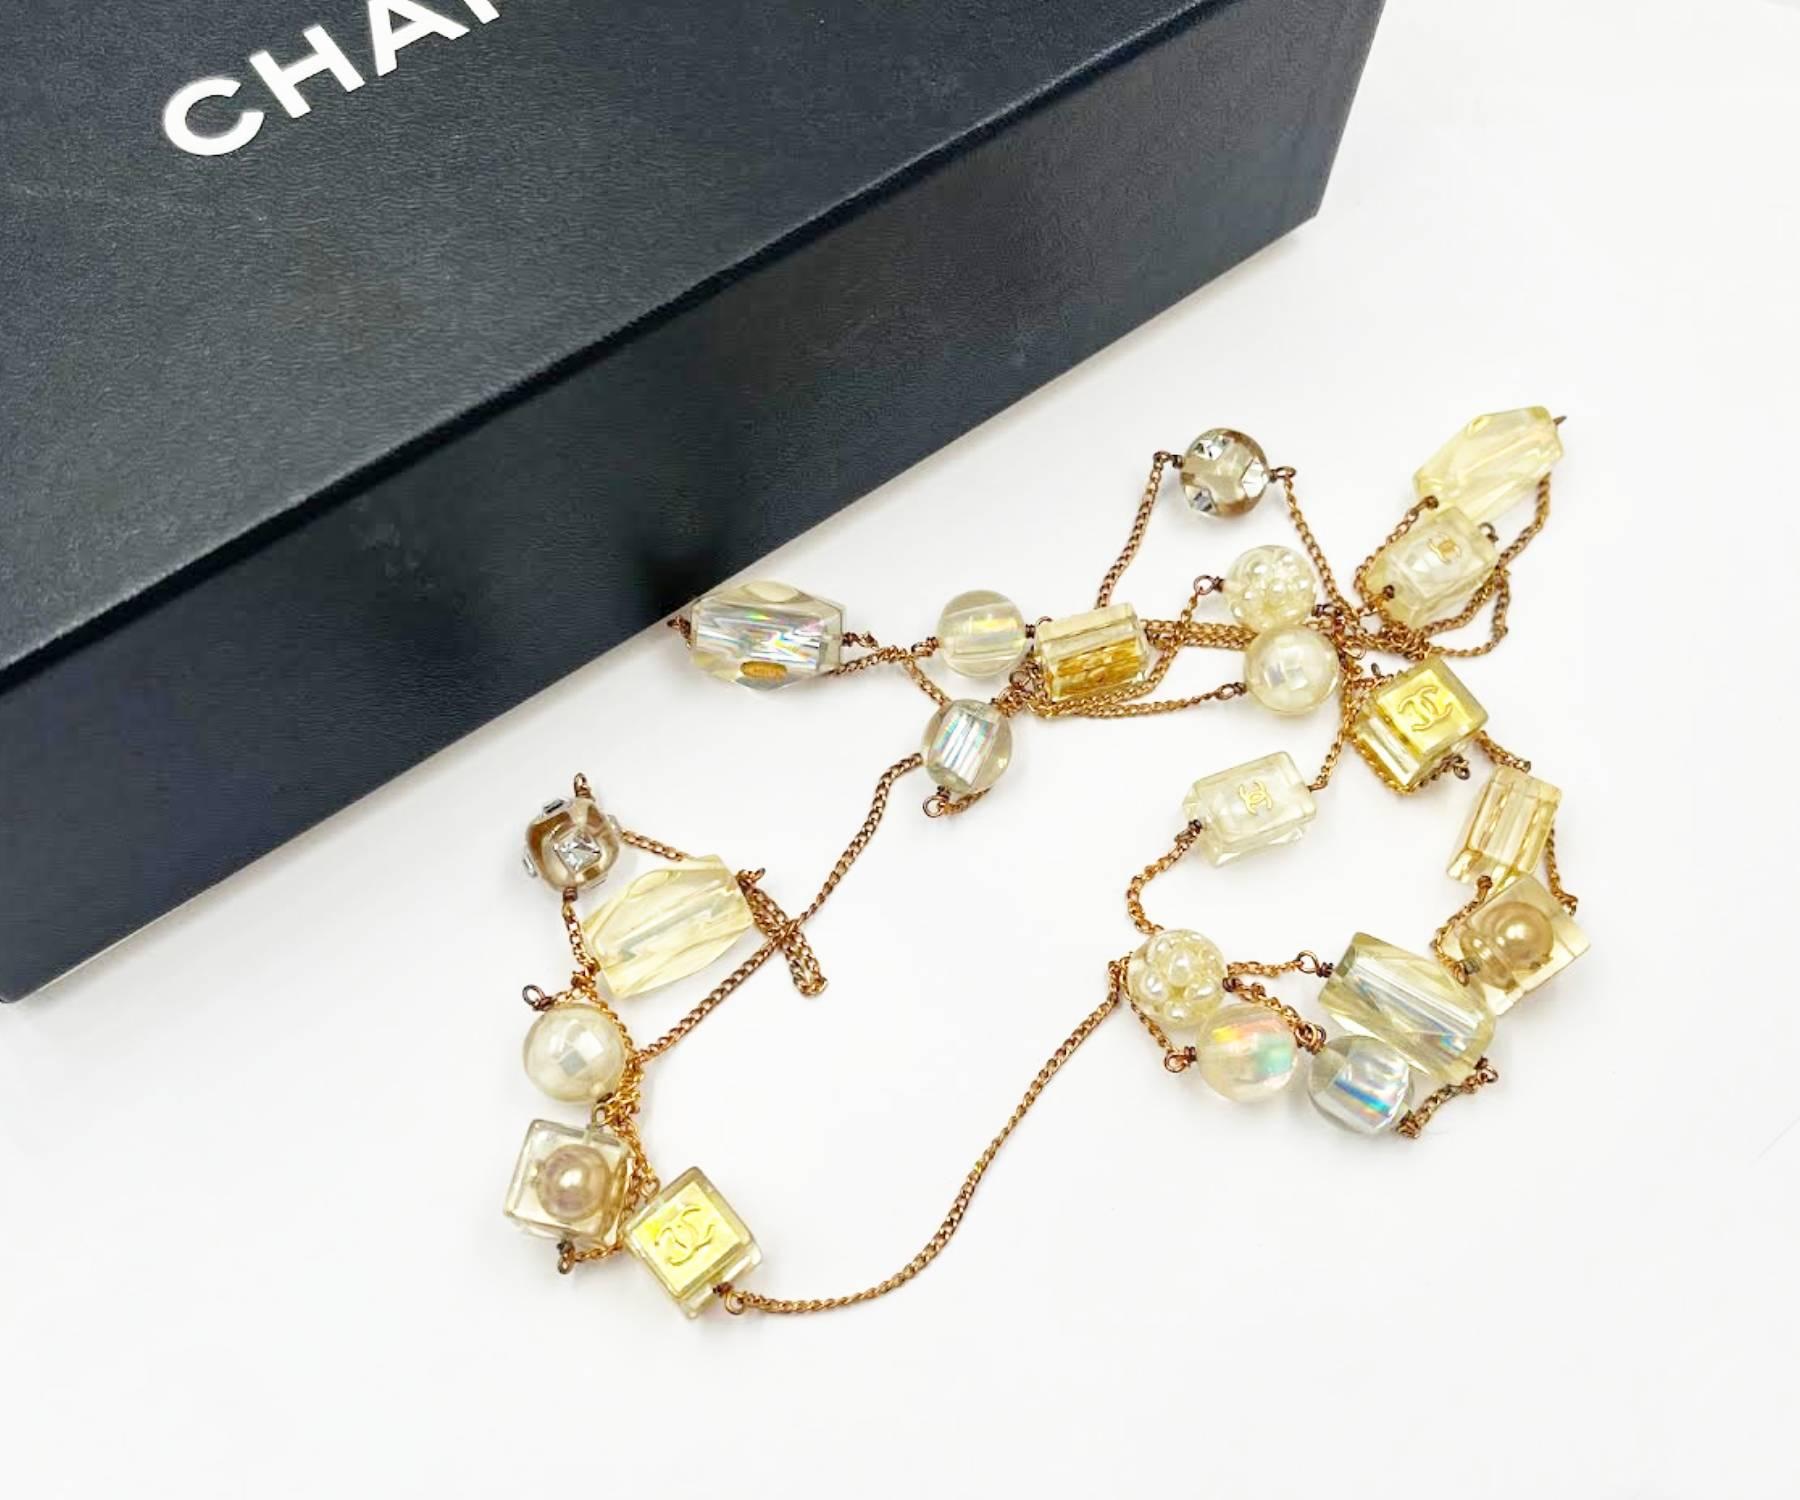 Chanel Vintage Gold Plated CC Resin Dice Pearl Super Long Necklace

* Marked 97
* Made in France
* Comes with the original box

-The chain is approximately 66″ long.
-The largest beads are approximately 0.9″ x 0.75″.
-Very shiny and